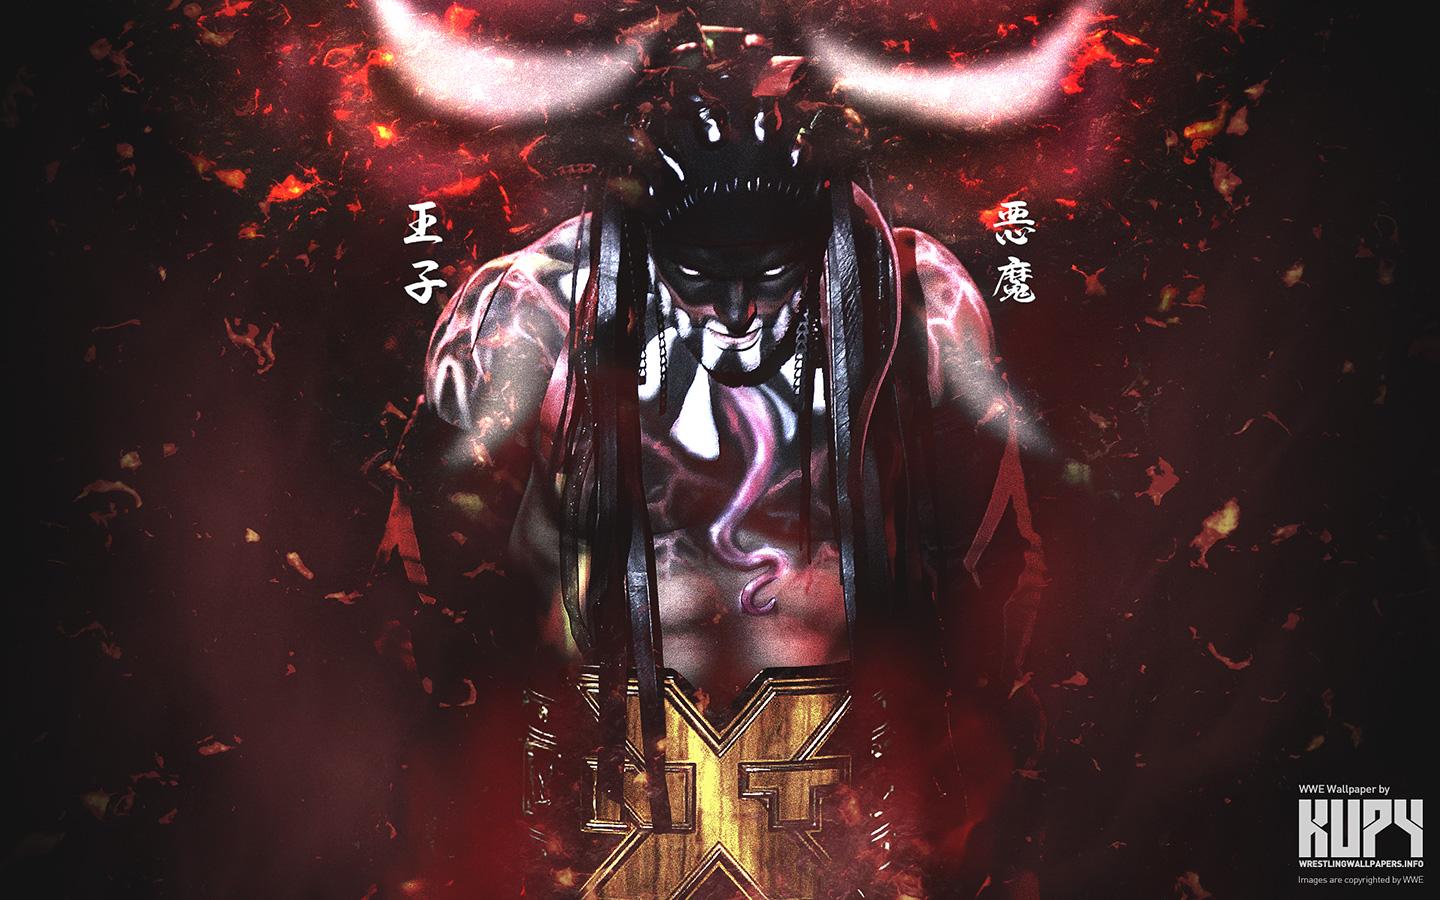 WWE image Finn Balor HD wallpaper and background photo